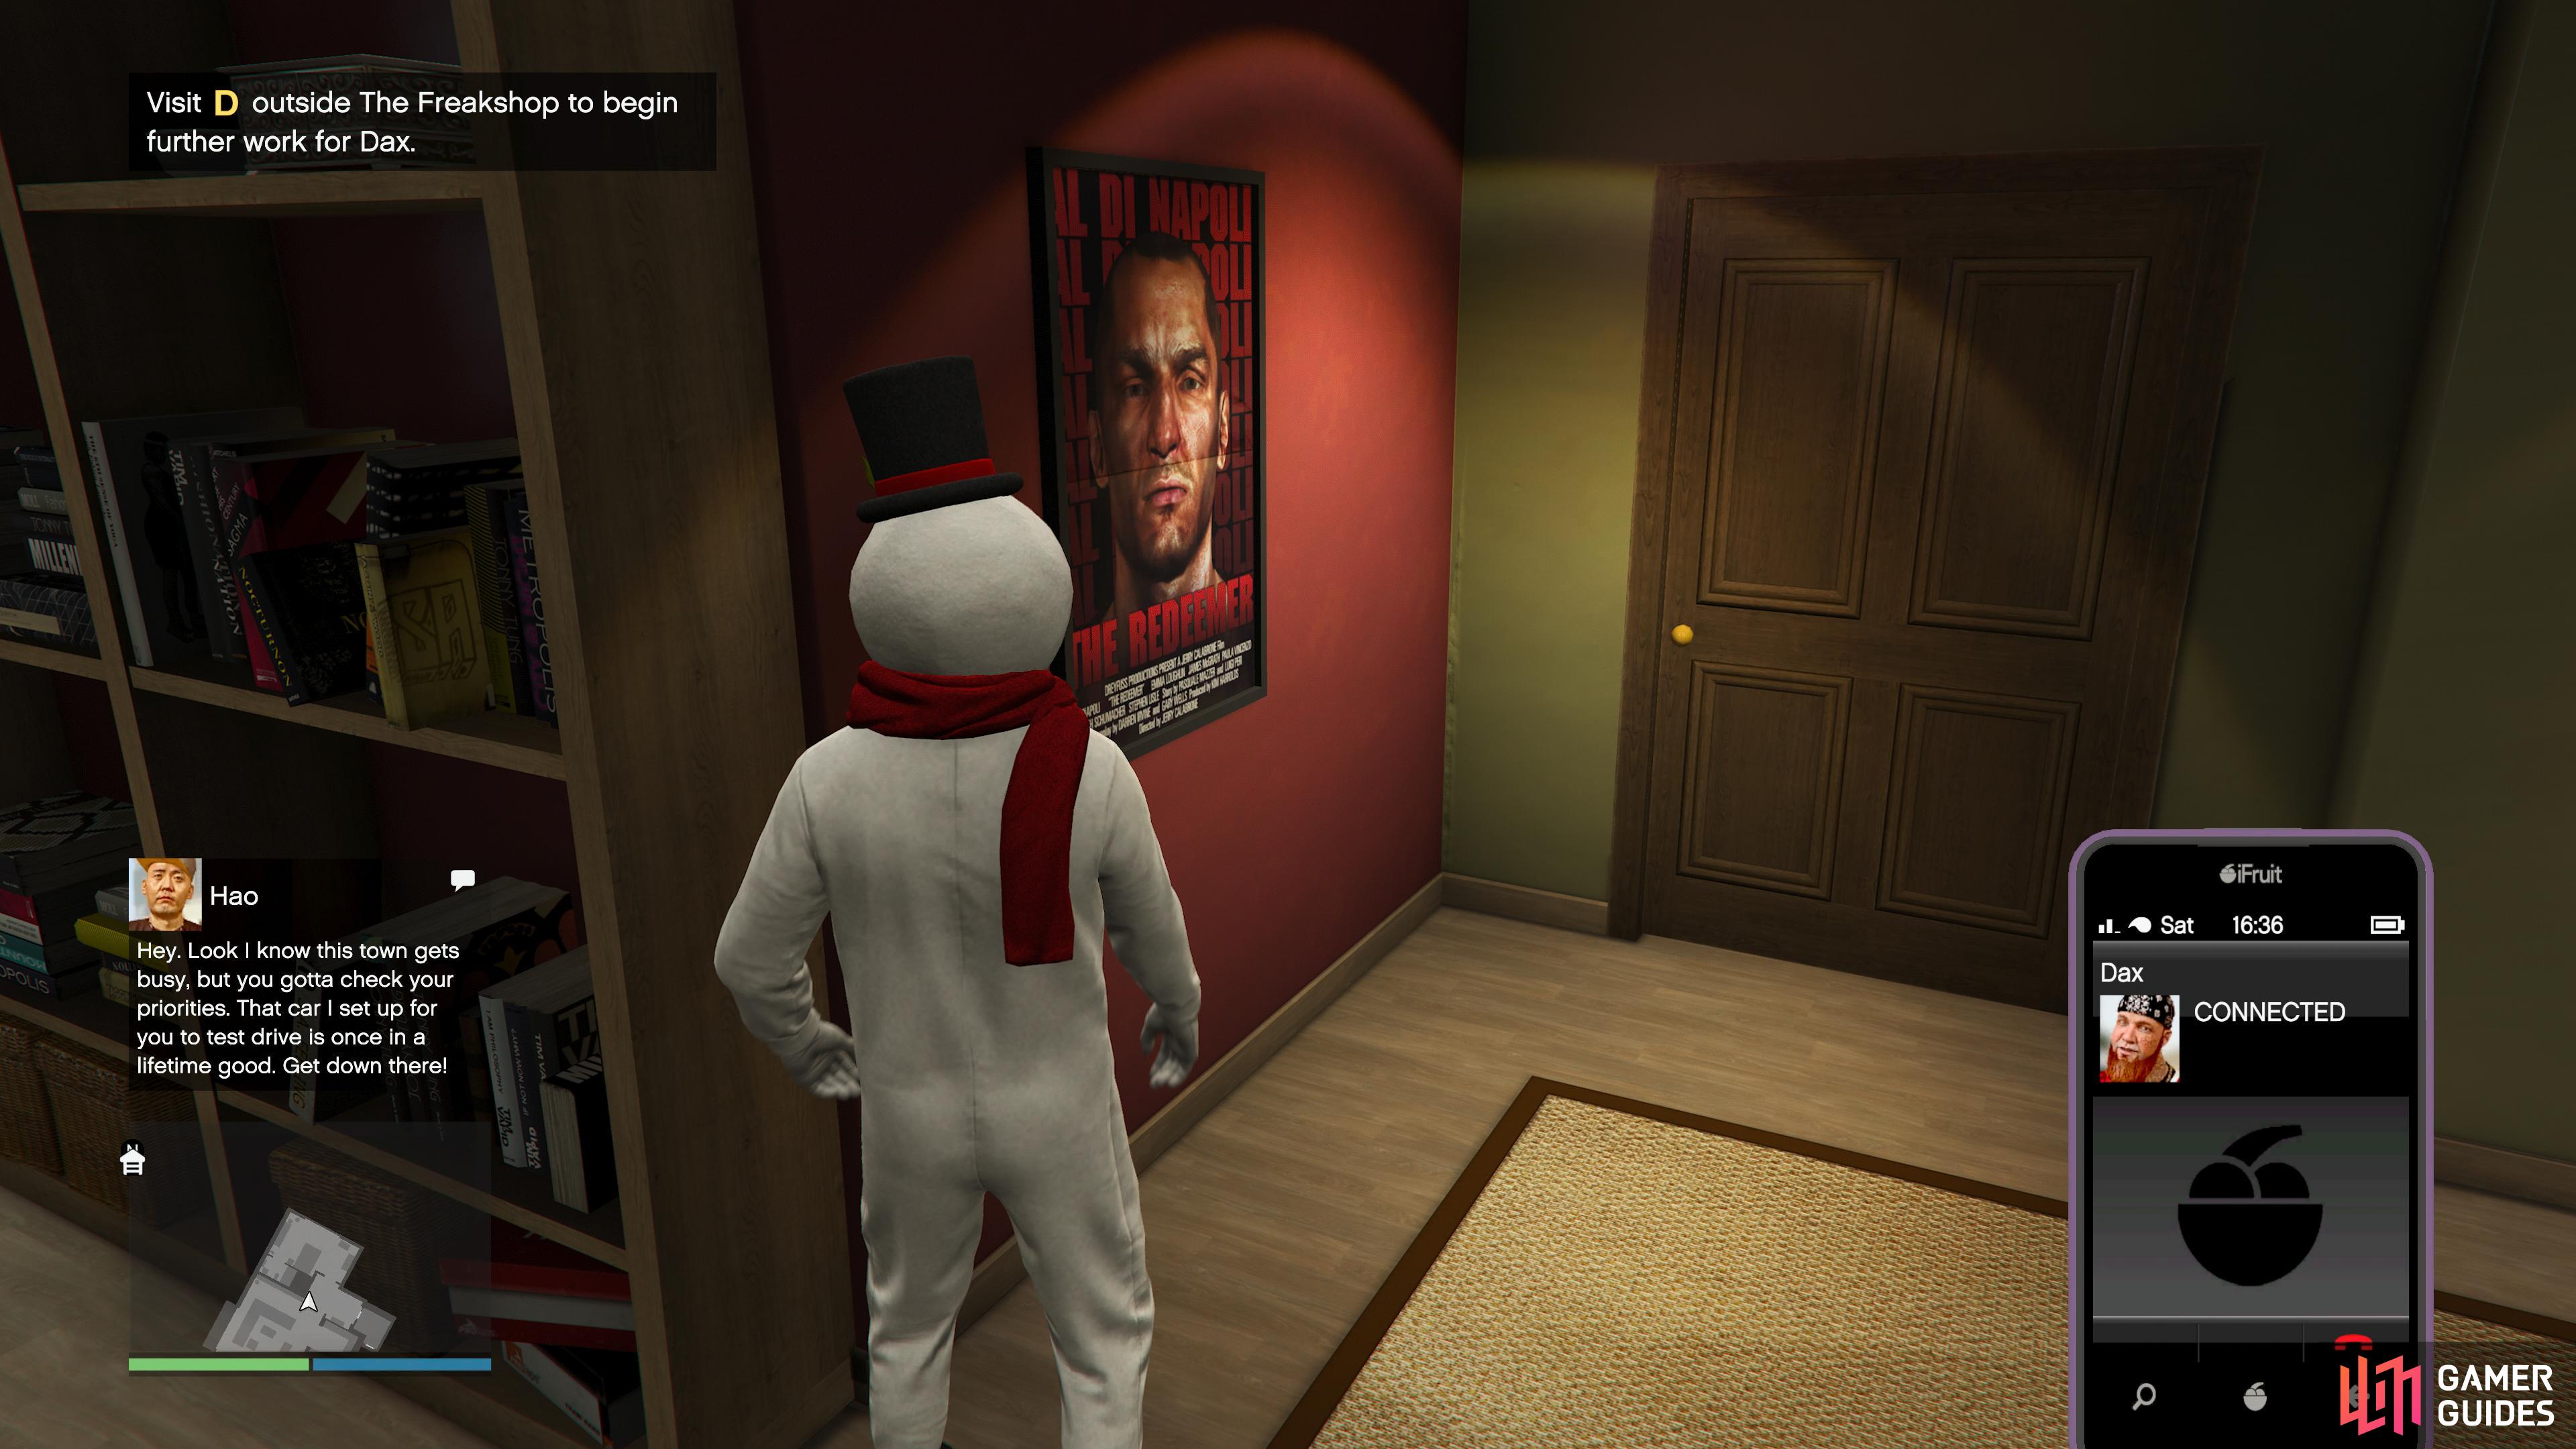 GTA Online: How to Start the Los Santos Drug Wars and Access The Freakshop